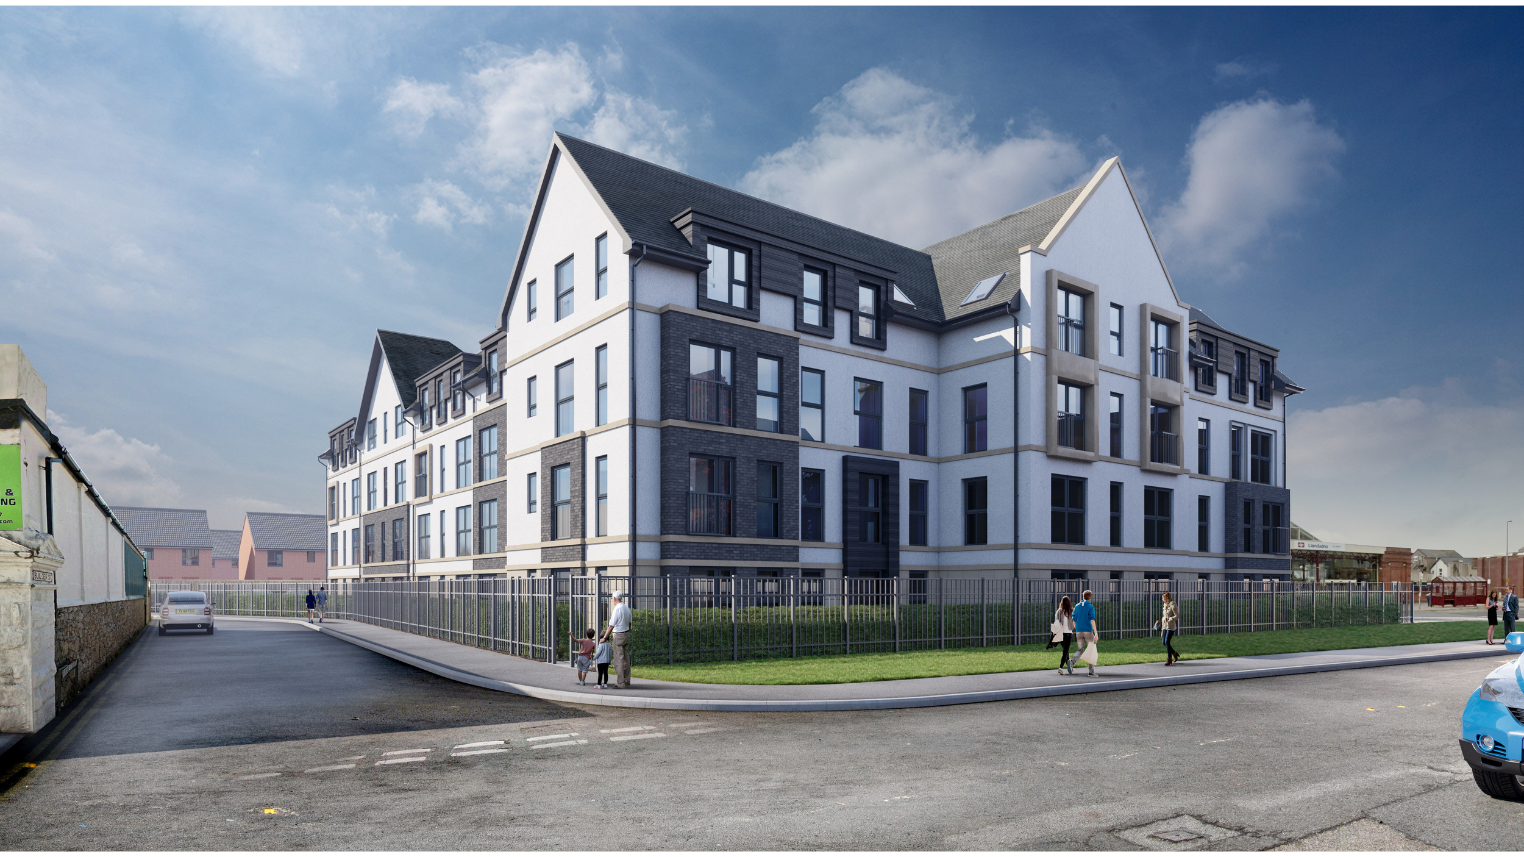 Planning given green light for affordable homes in Llandudno